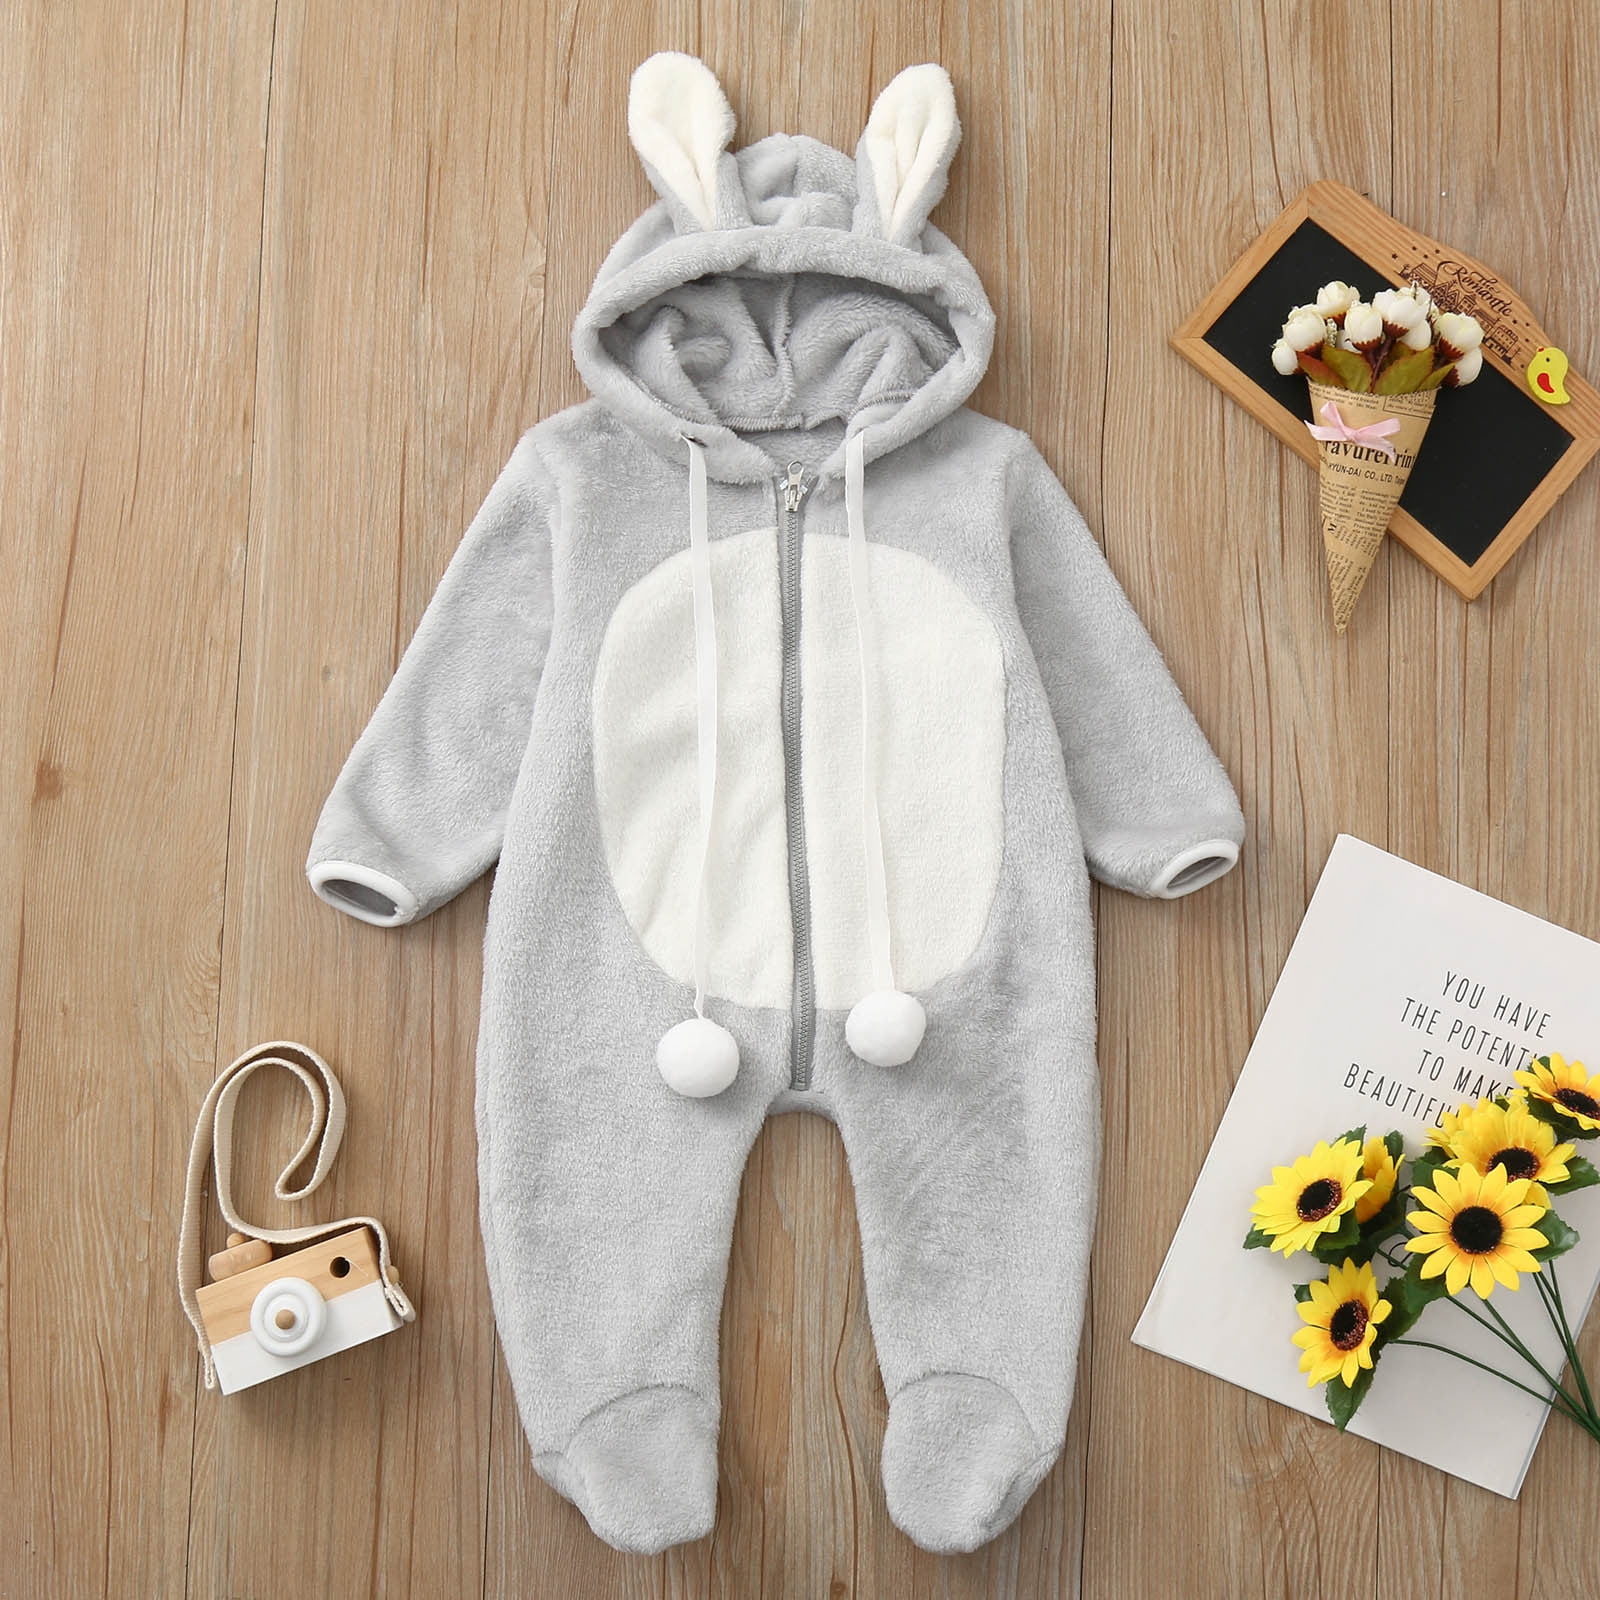 Winter New Baby Long Sleeve Hooded Romper Thick Warm Newborn Fleece Jumpsuit  Cotton Infant Toddler Boy Girl Clothes 0-24M